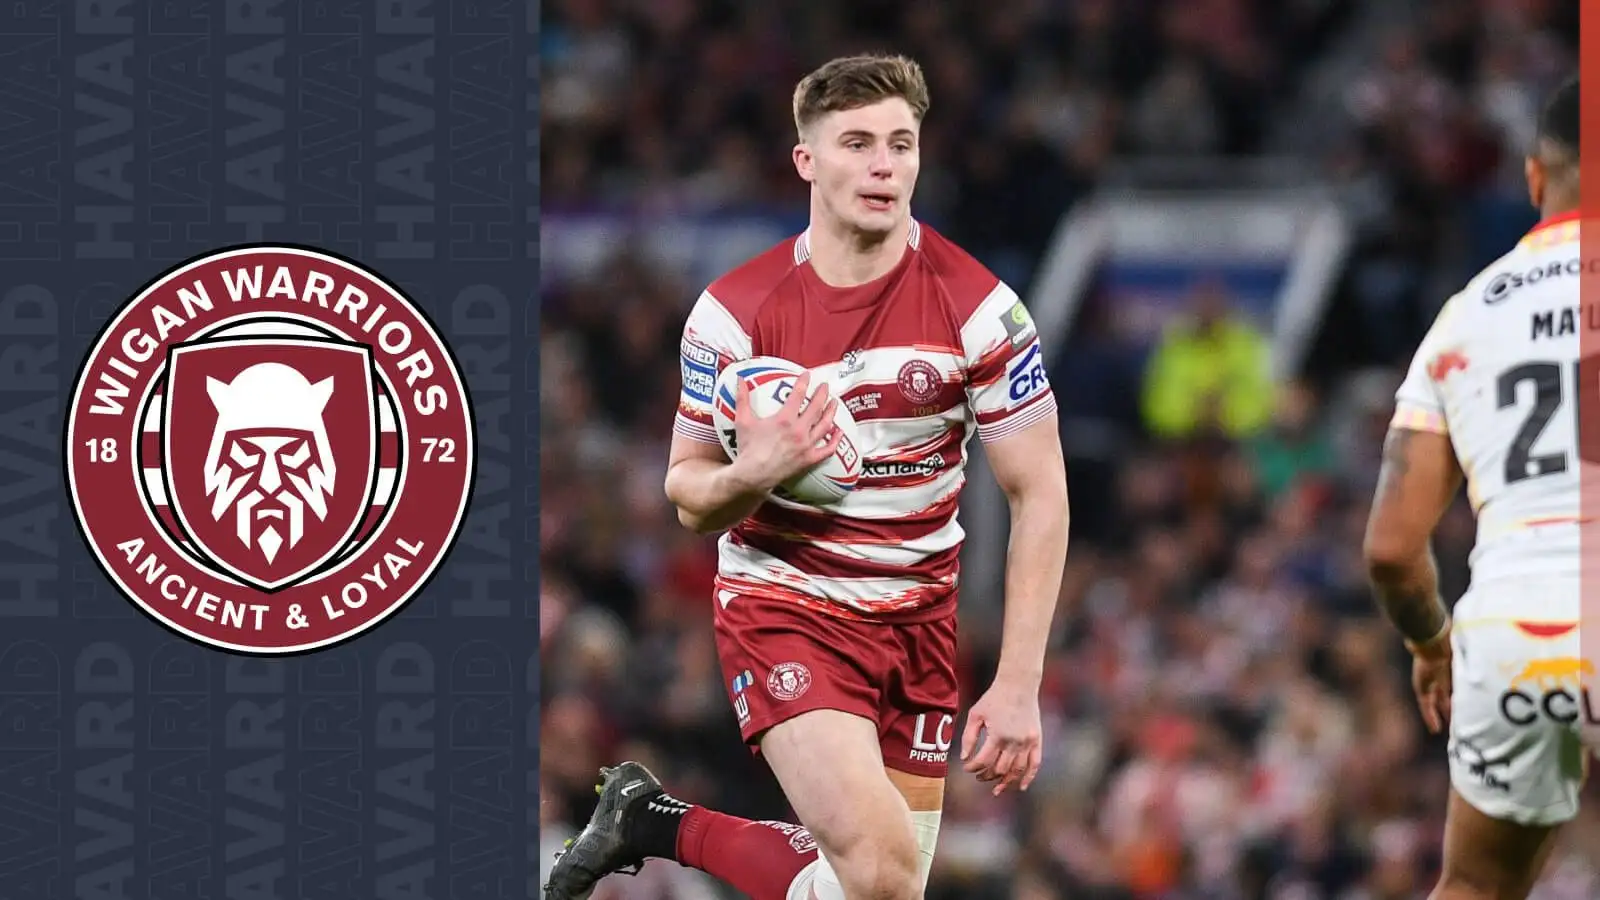 Wigan Warriors exclusive: Ethan Havard on Grand Final injury, why he has no regrets and ‘hunger’ to come back stronger